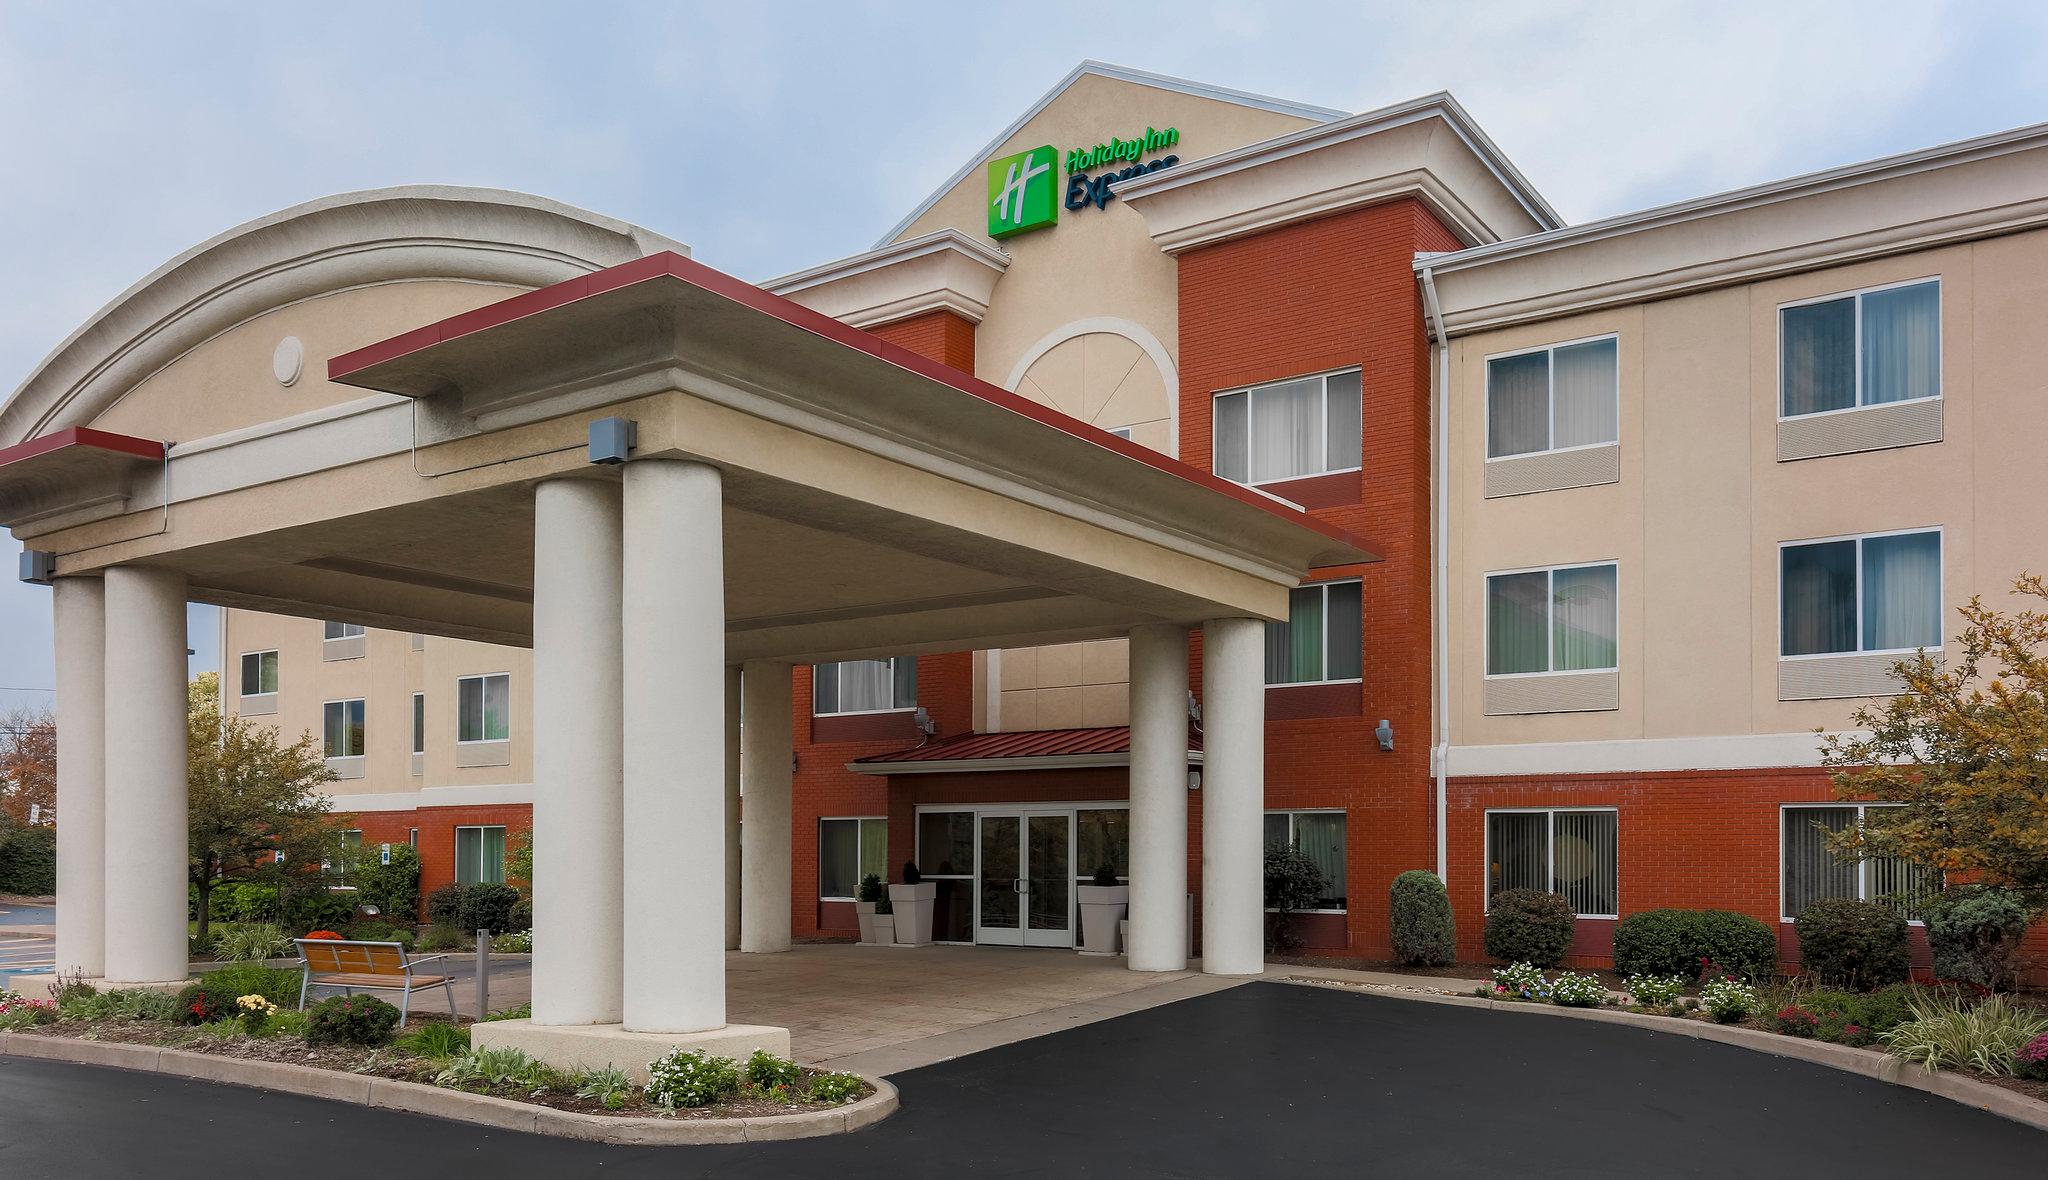 Holiday Inn Express Irondequoit in Rochester, NY